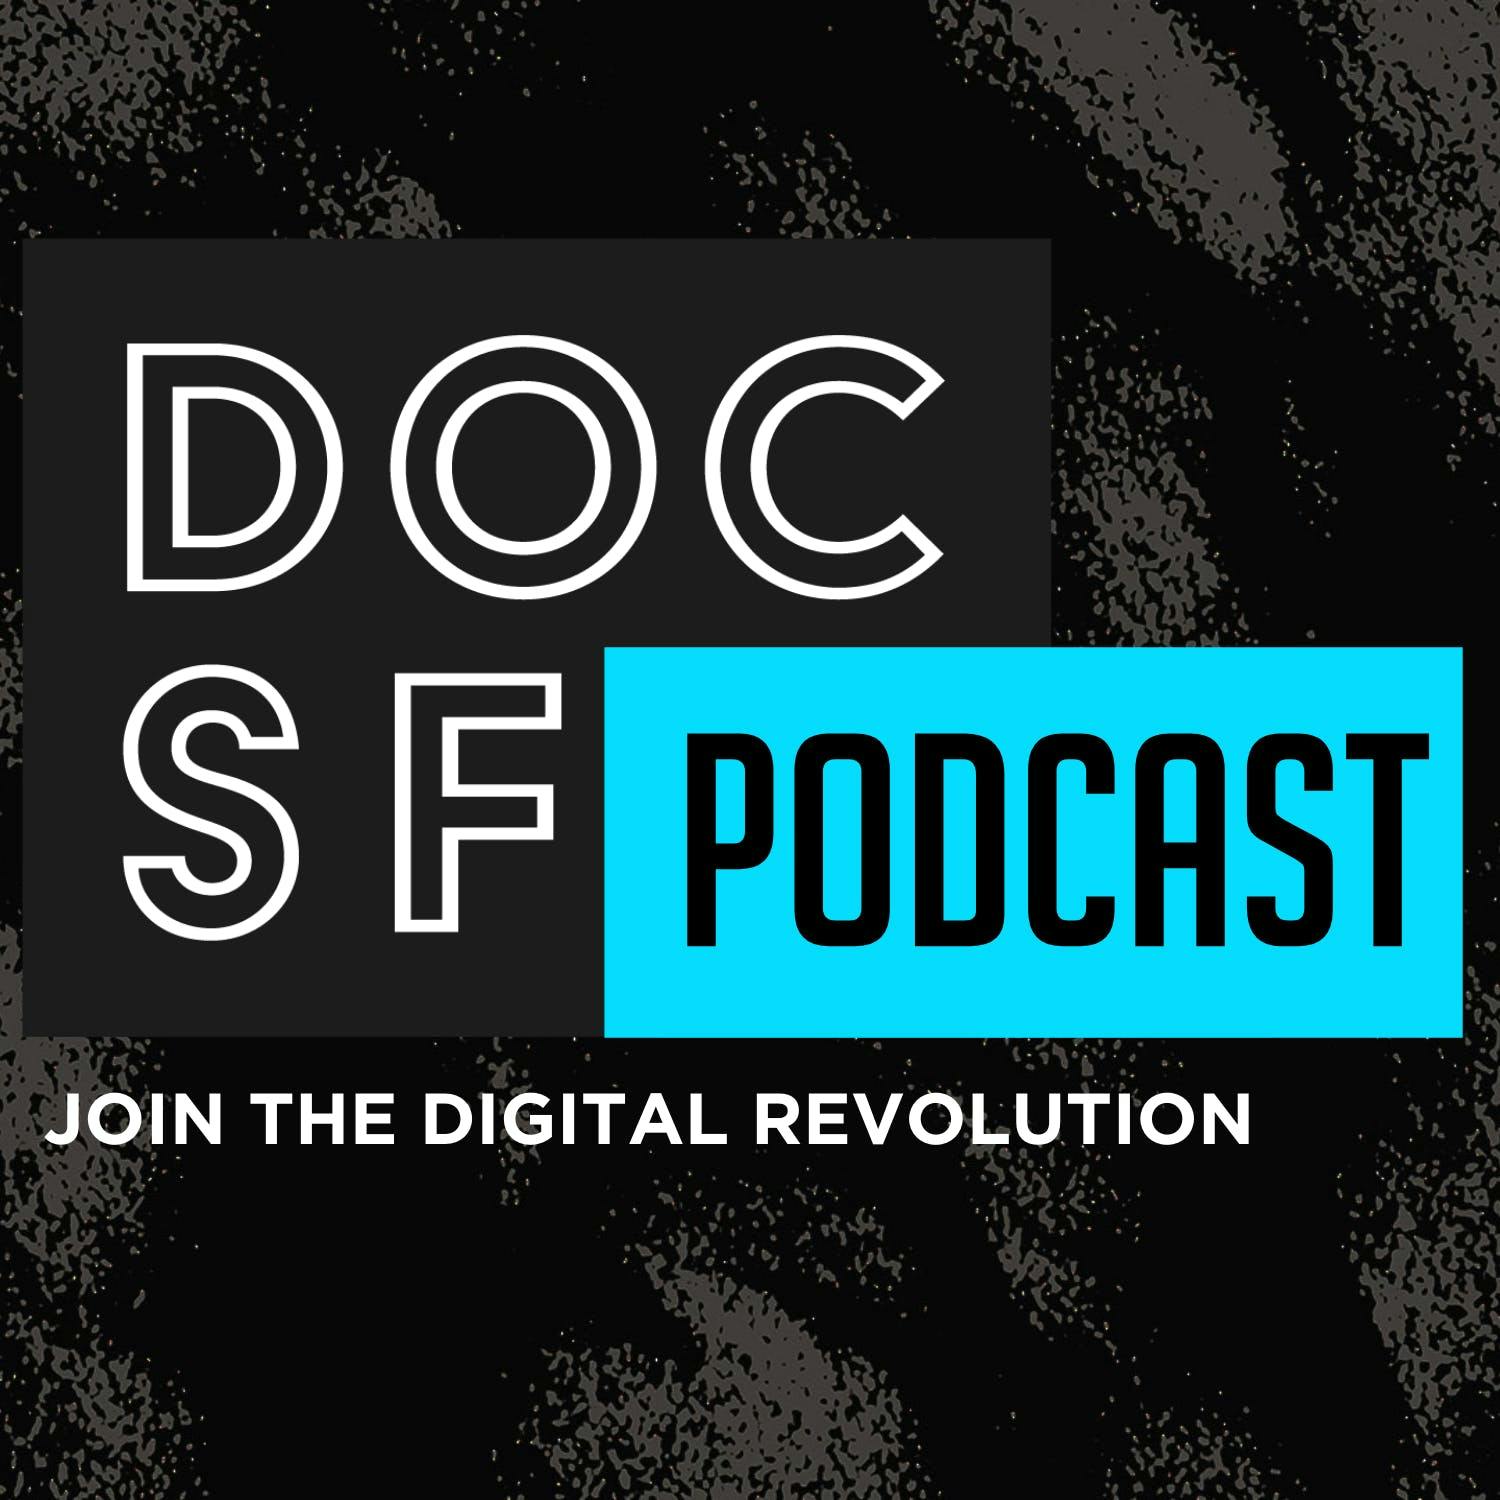 DOCSF – Digital Orthopaedics Conference San Francisco: Making the transition to Value Based Care